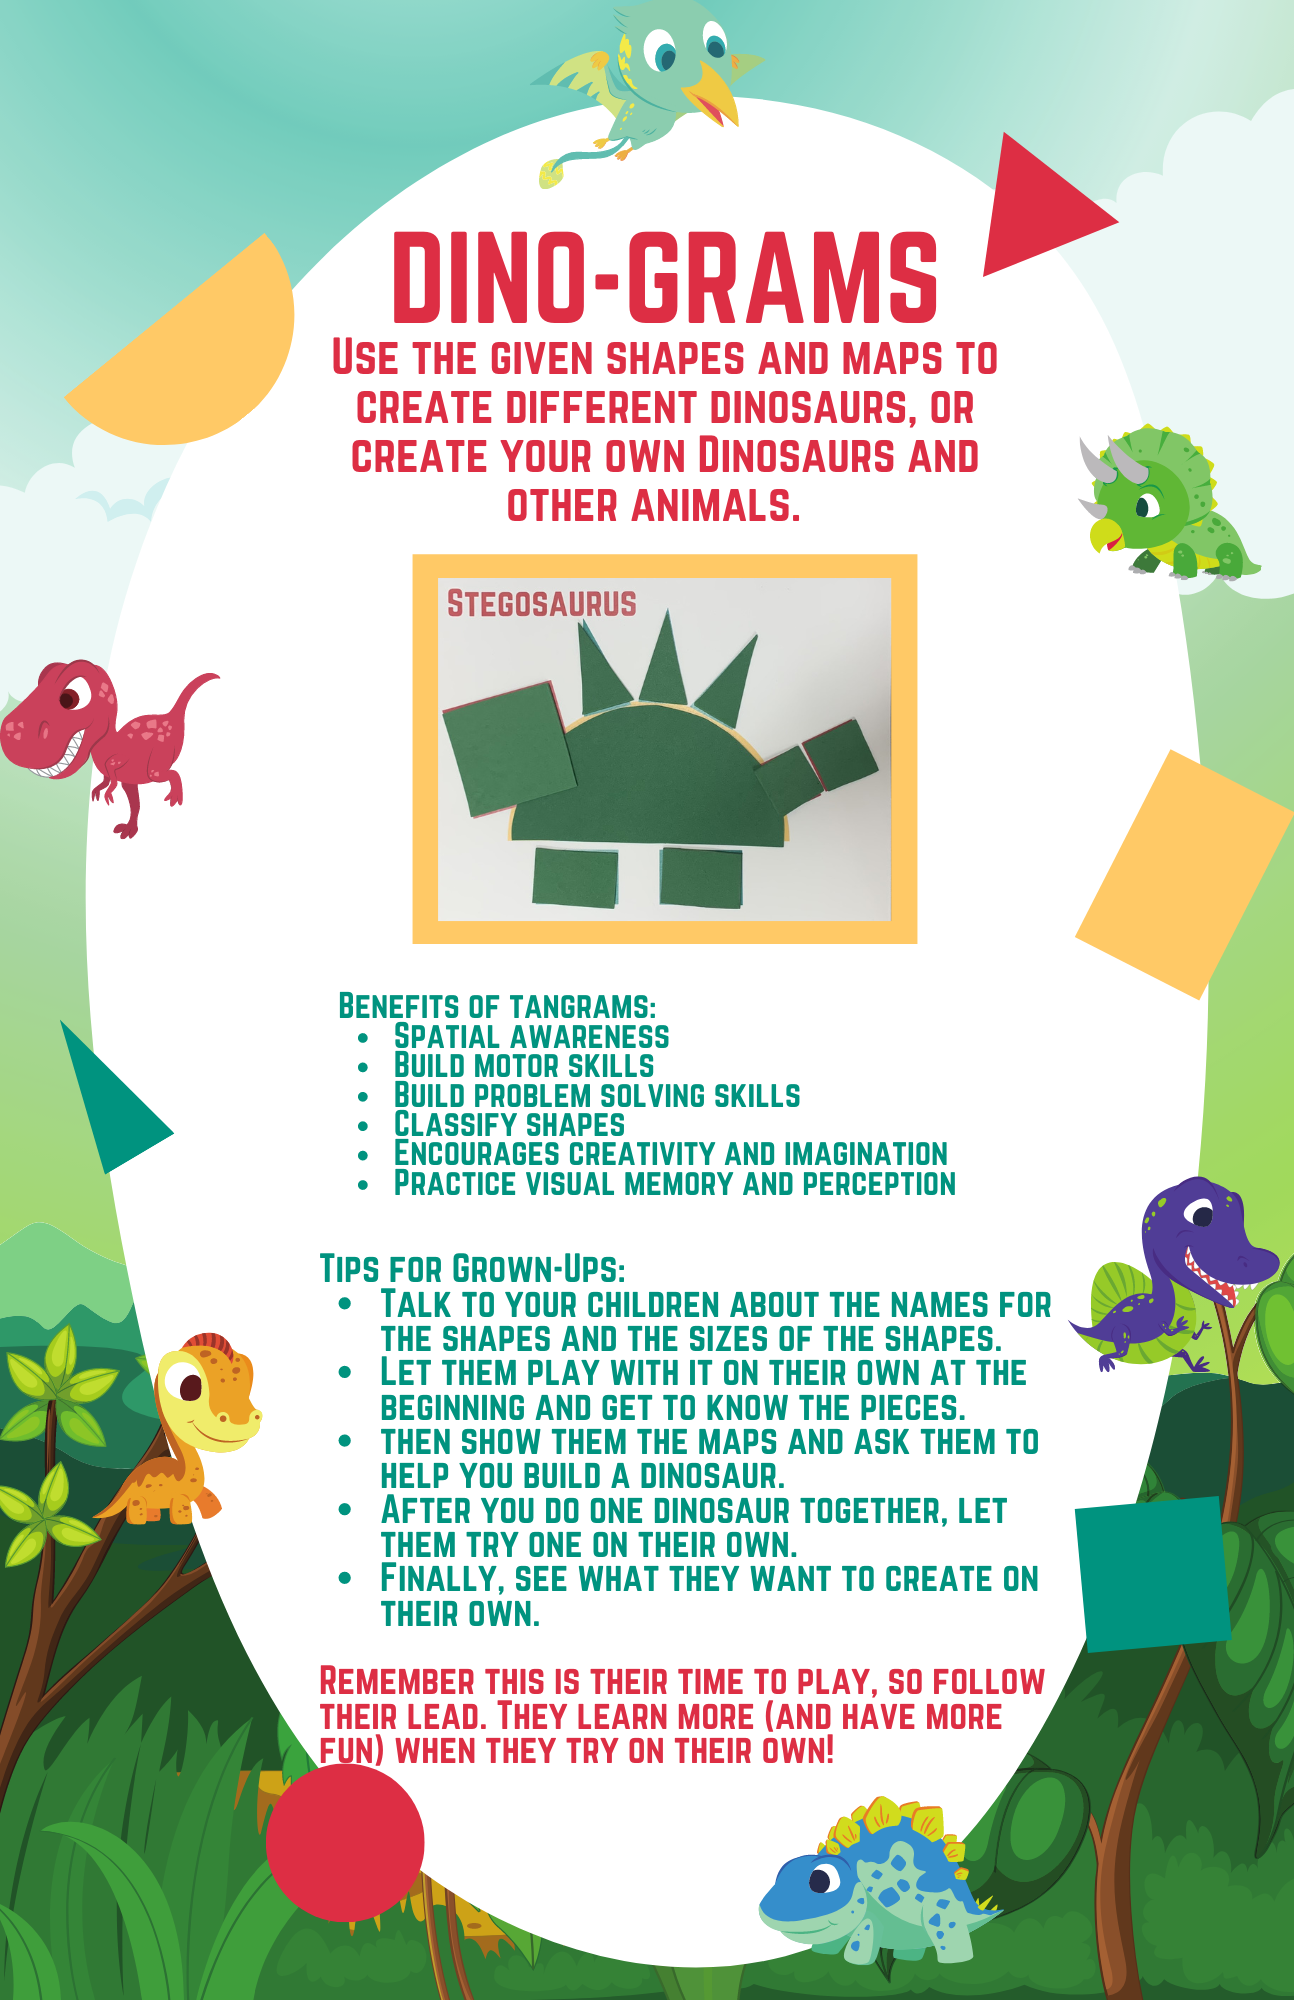 Use the given shapes and maps to create different dinosaurs, or create your own dinosaurs and other animals. Great for ages 3-8.  Kits will be available for pickup between Monday-Thursday, from 9am-7pm and Friday-Saturday from 9am-5pm at the Main Library (via curbside or at the Youth Services desk). We would love to have you share your creations with us at #kckpl.